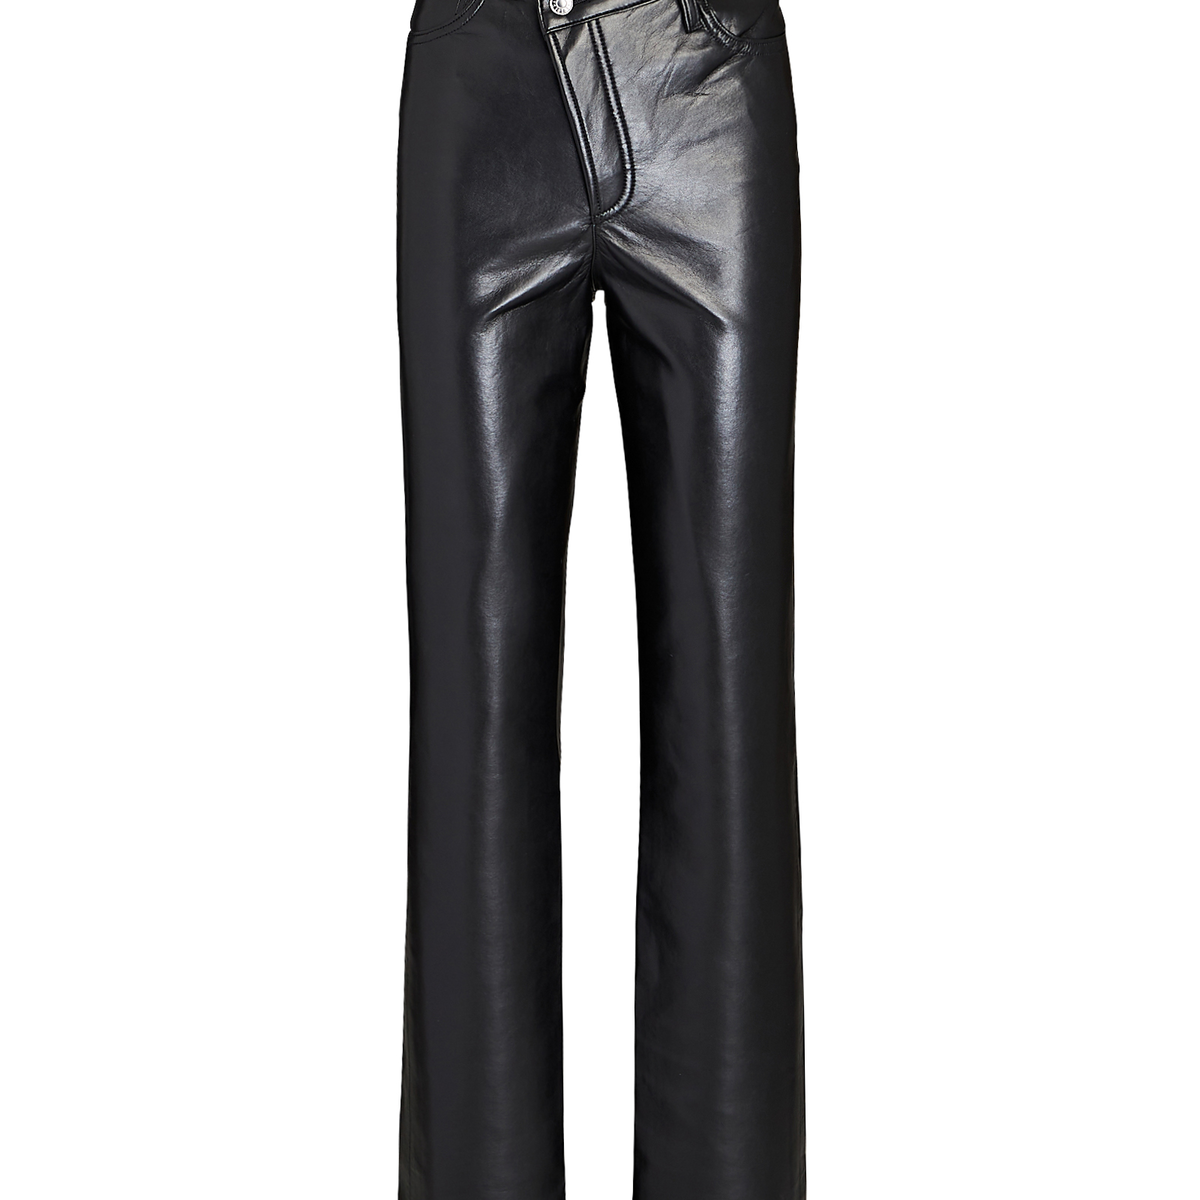 AGOLDE Criss Cross Leather Pants In Black | INTERMIX®